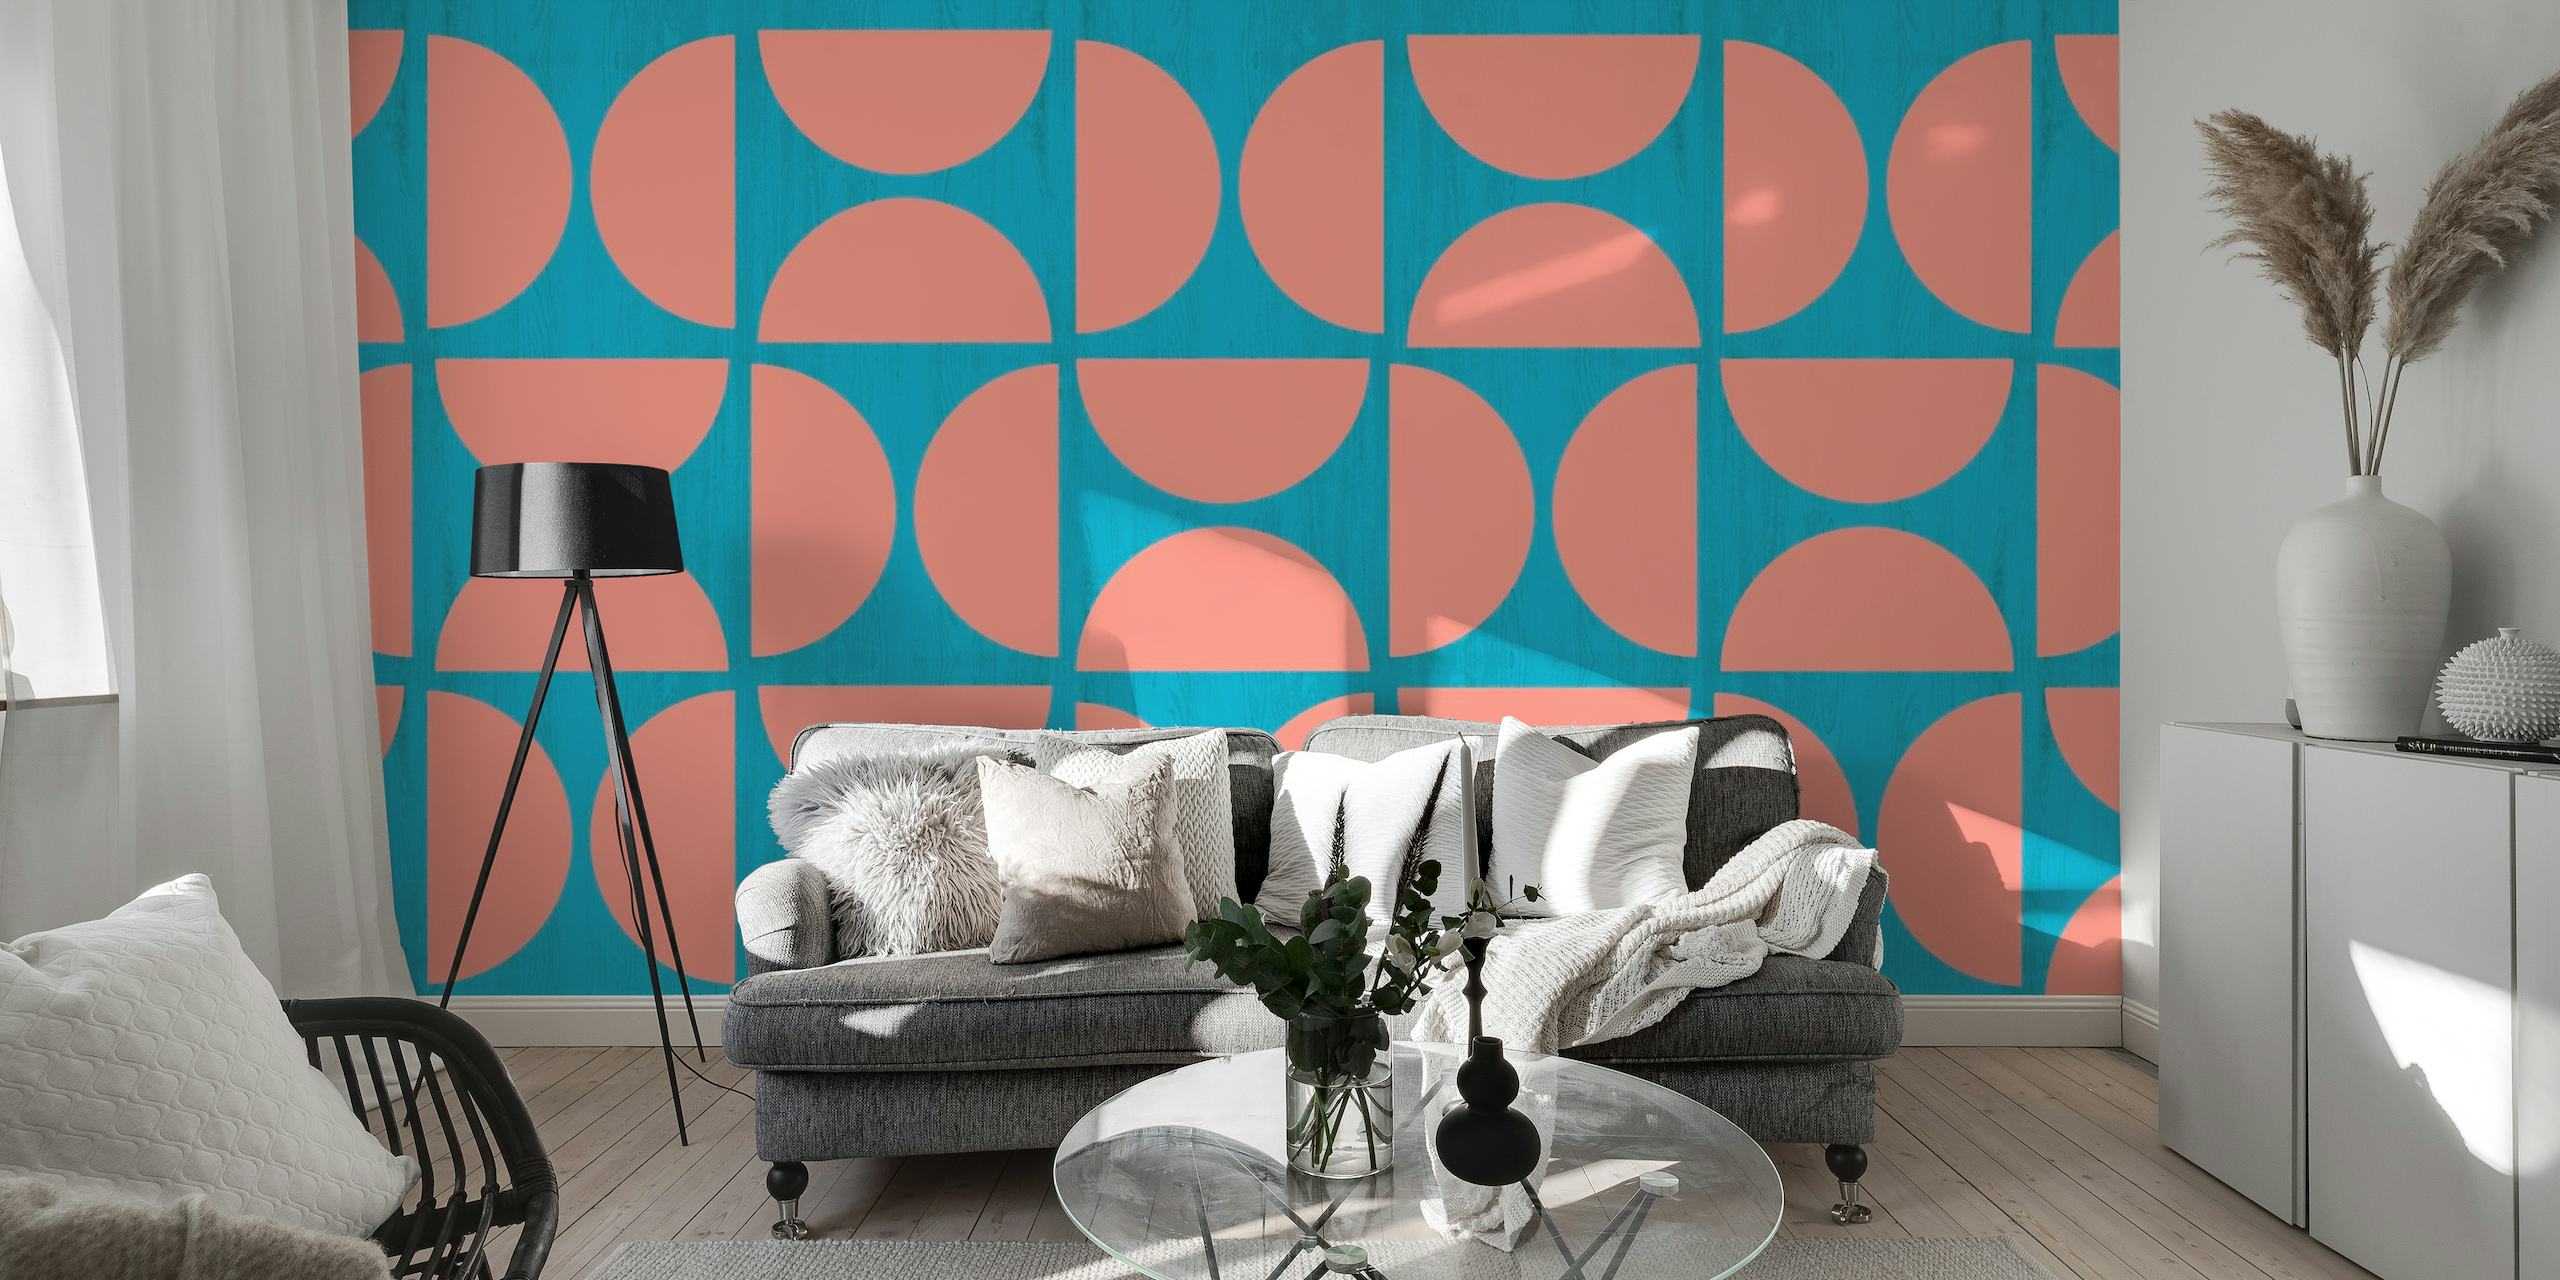 Mid-century modern wood pattern wall mural in teal and coral